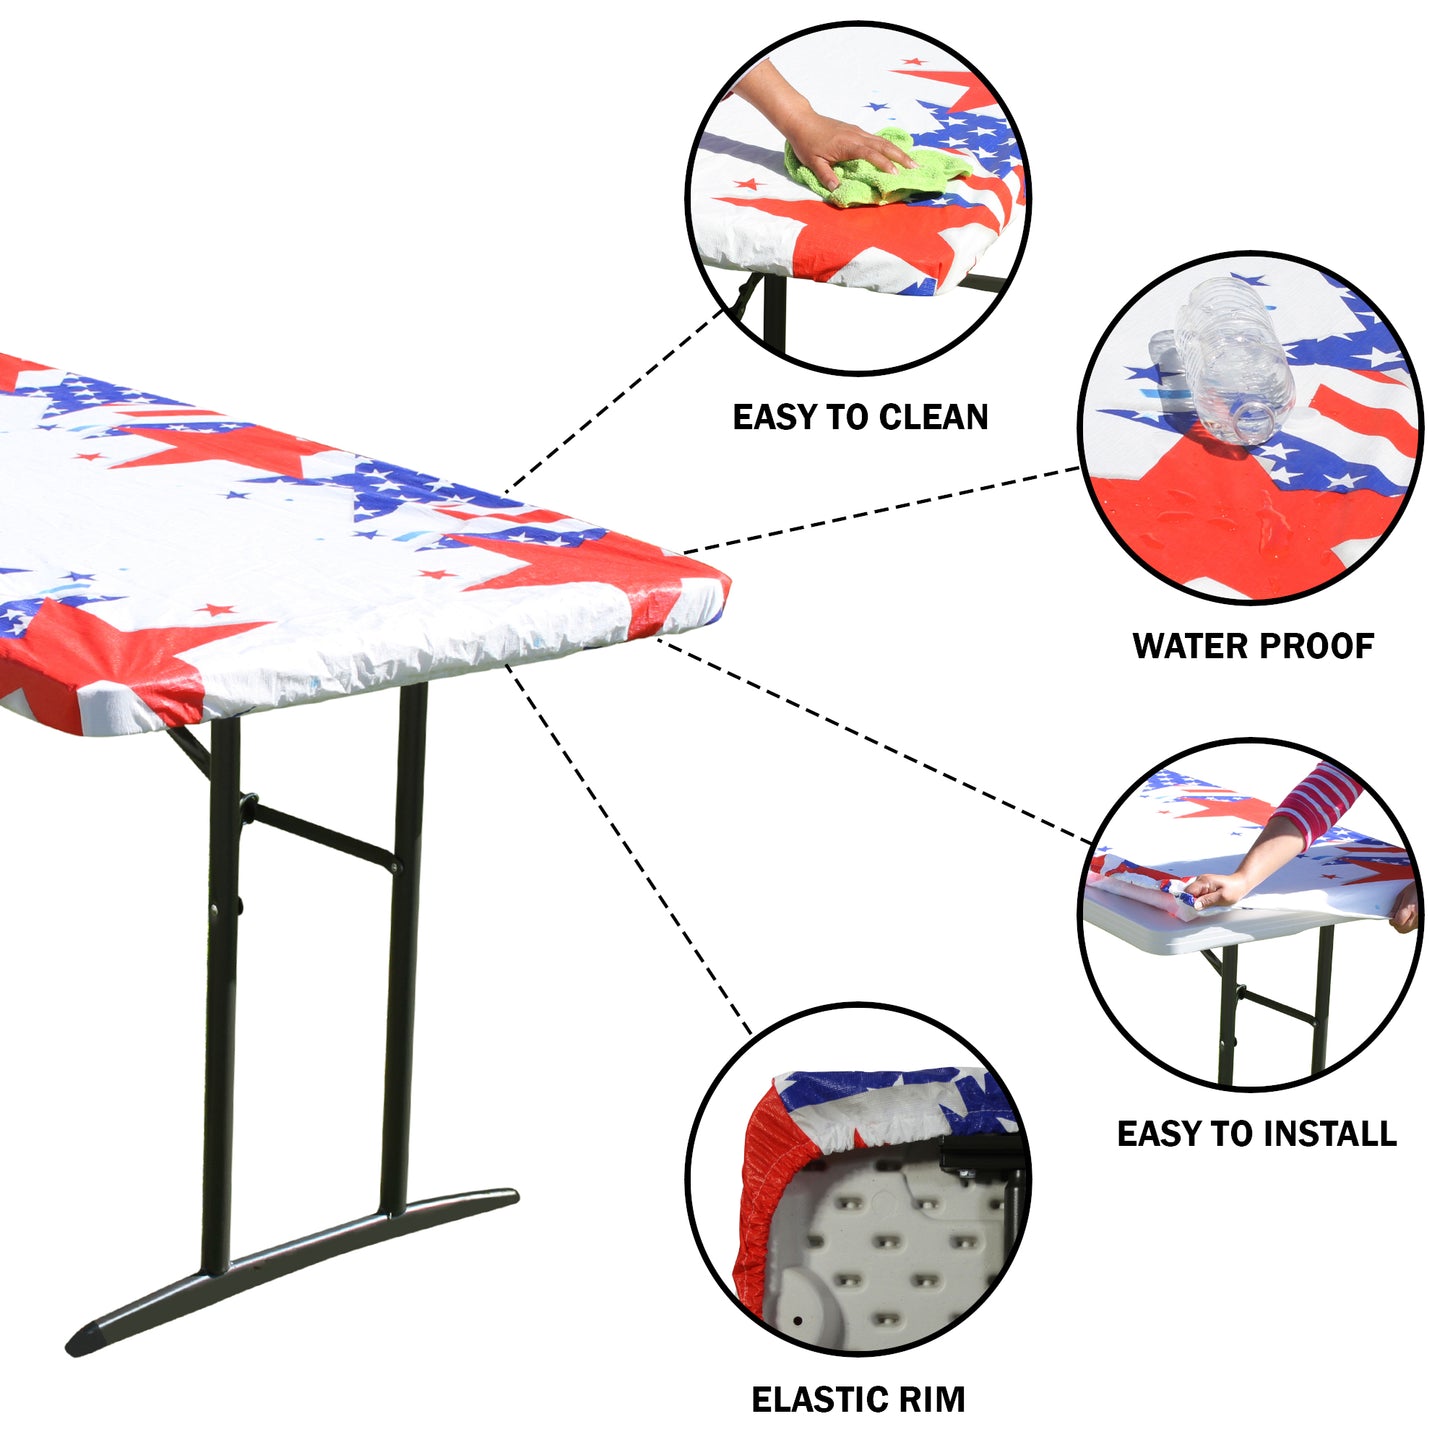 TableCloth PLUS 72" Patriotic Fitted PEVA Vinyl Tablecloth for 6' Folding Tables is easy to clean, water proof, easy to install, and has an elastic rim